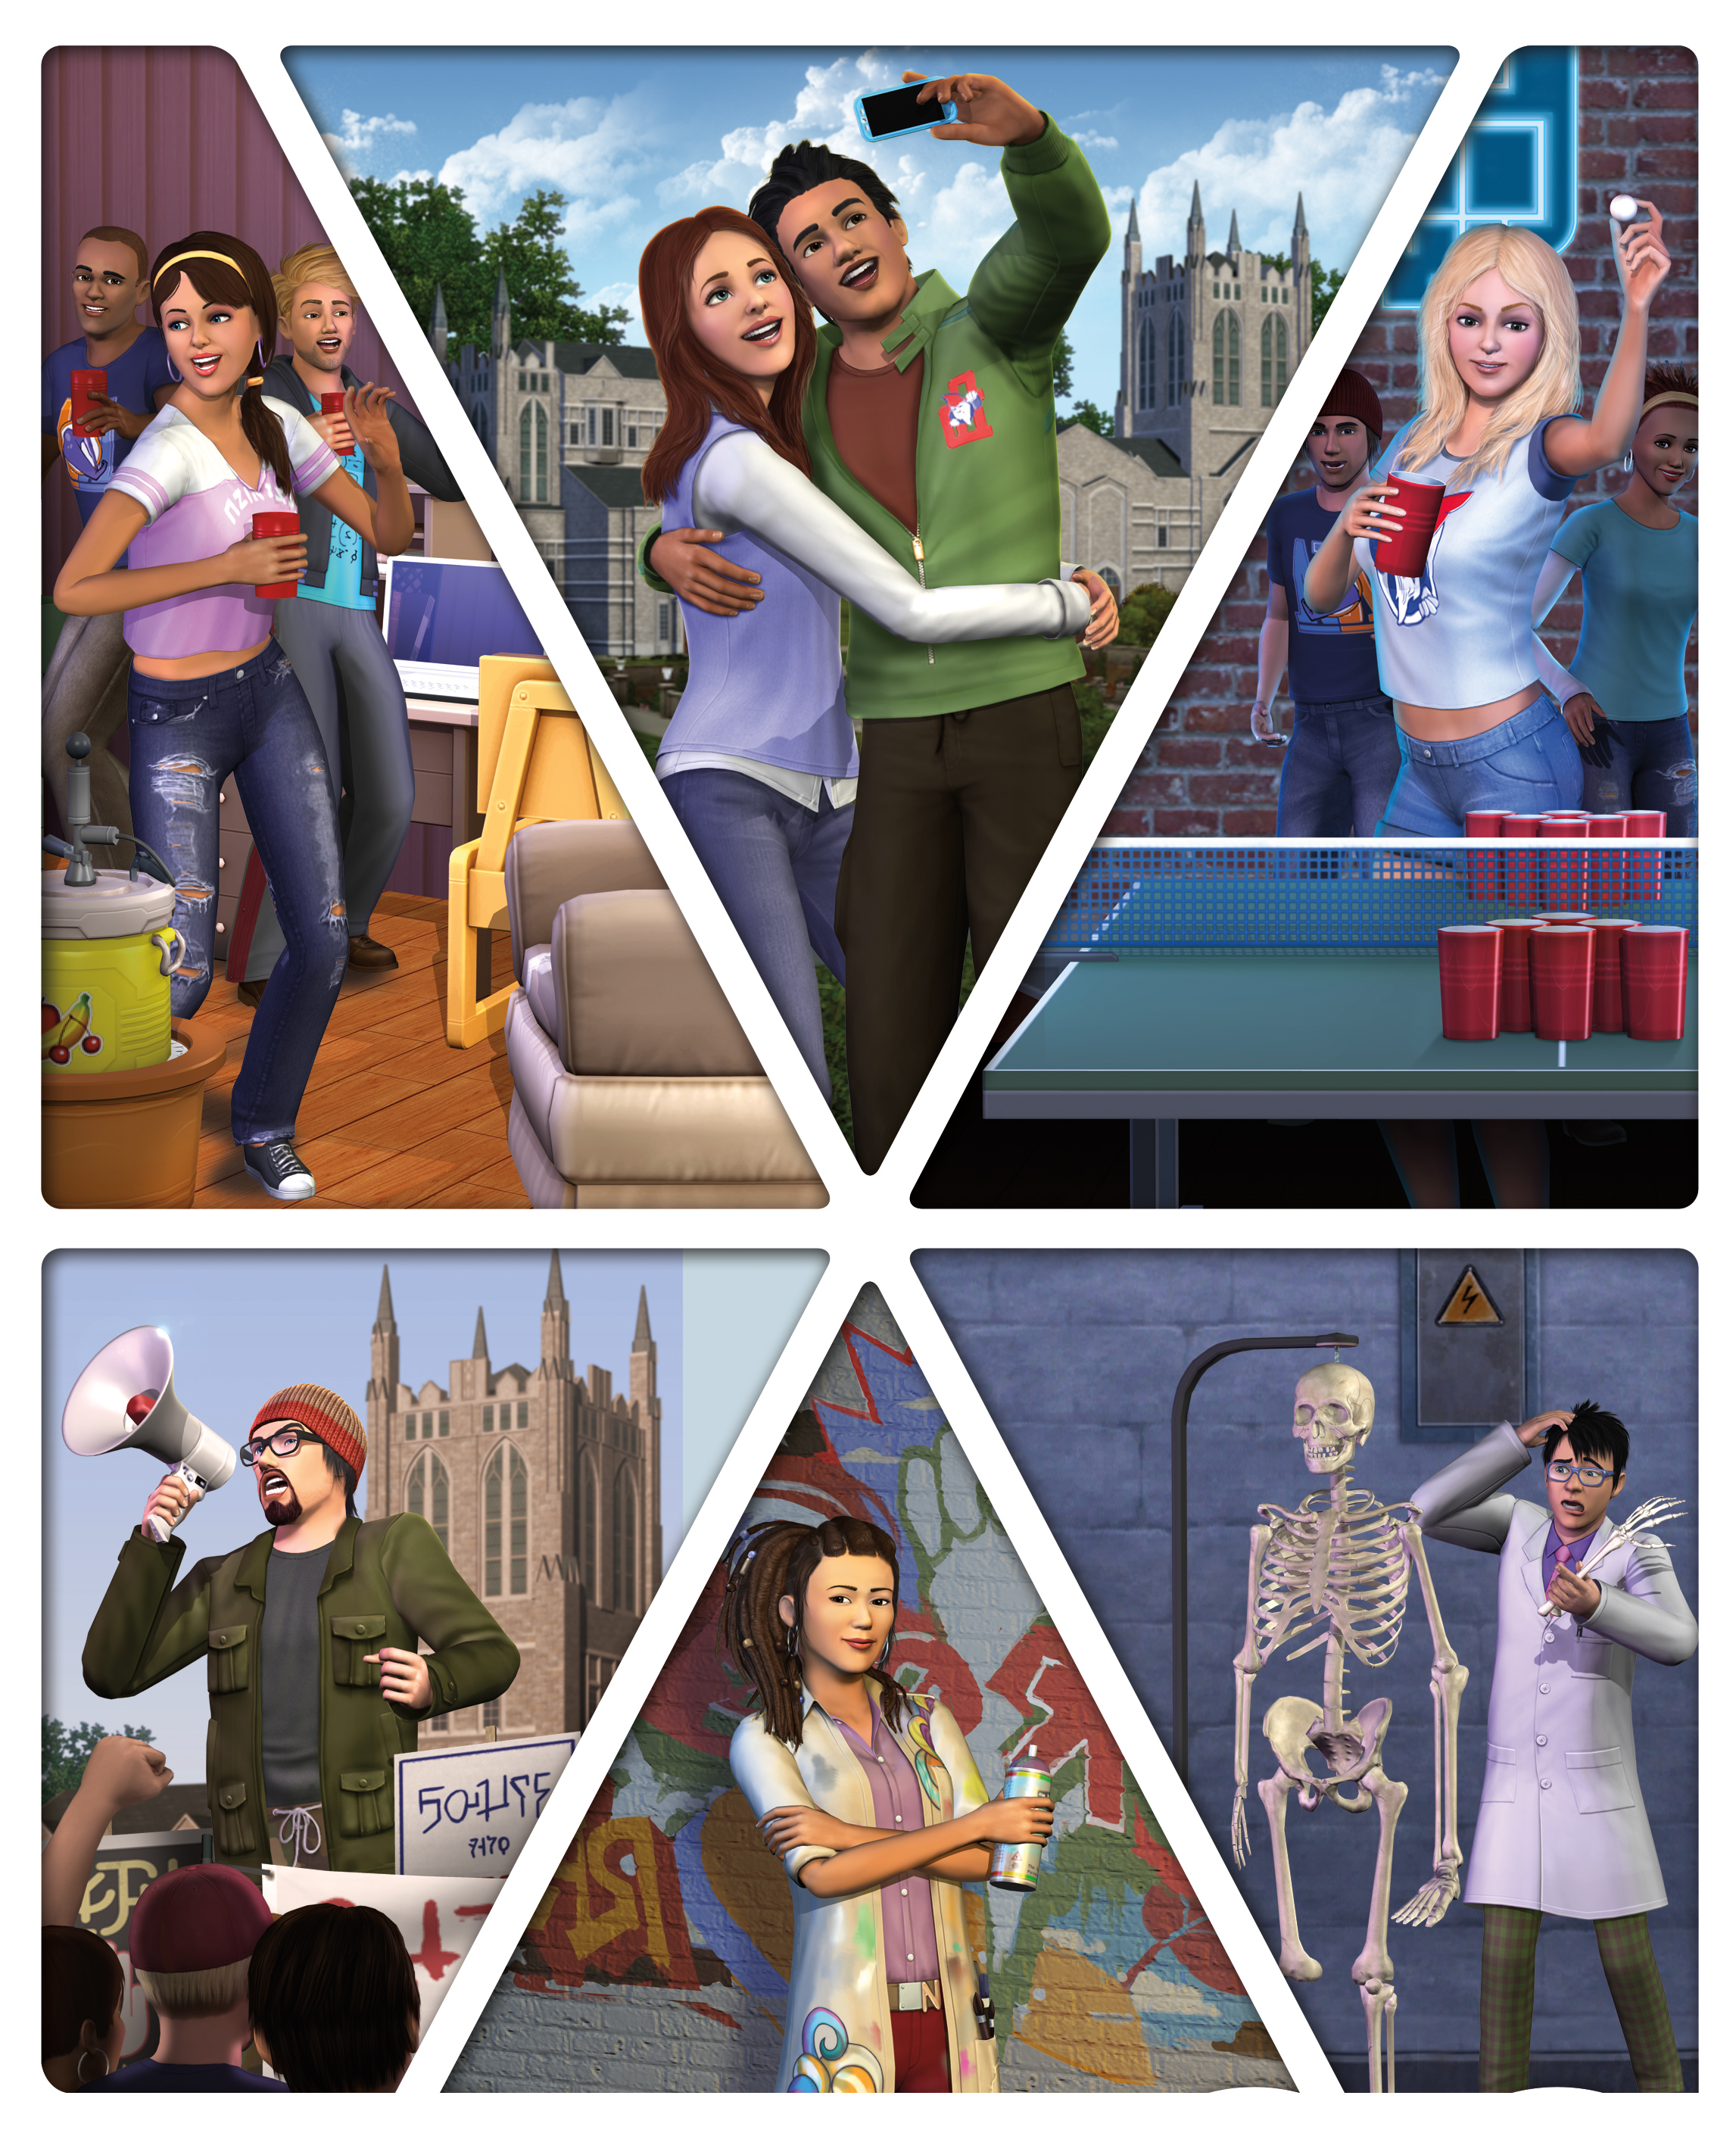 download sims 3 for mac free